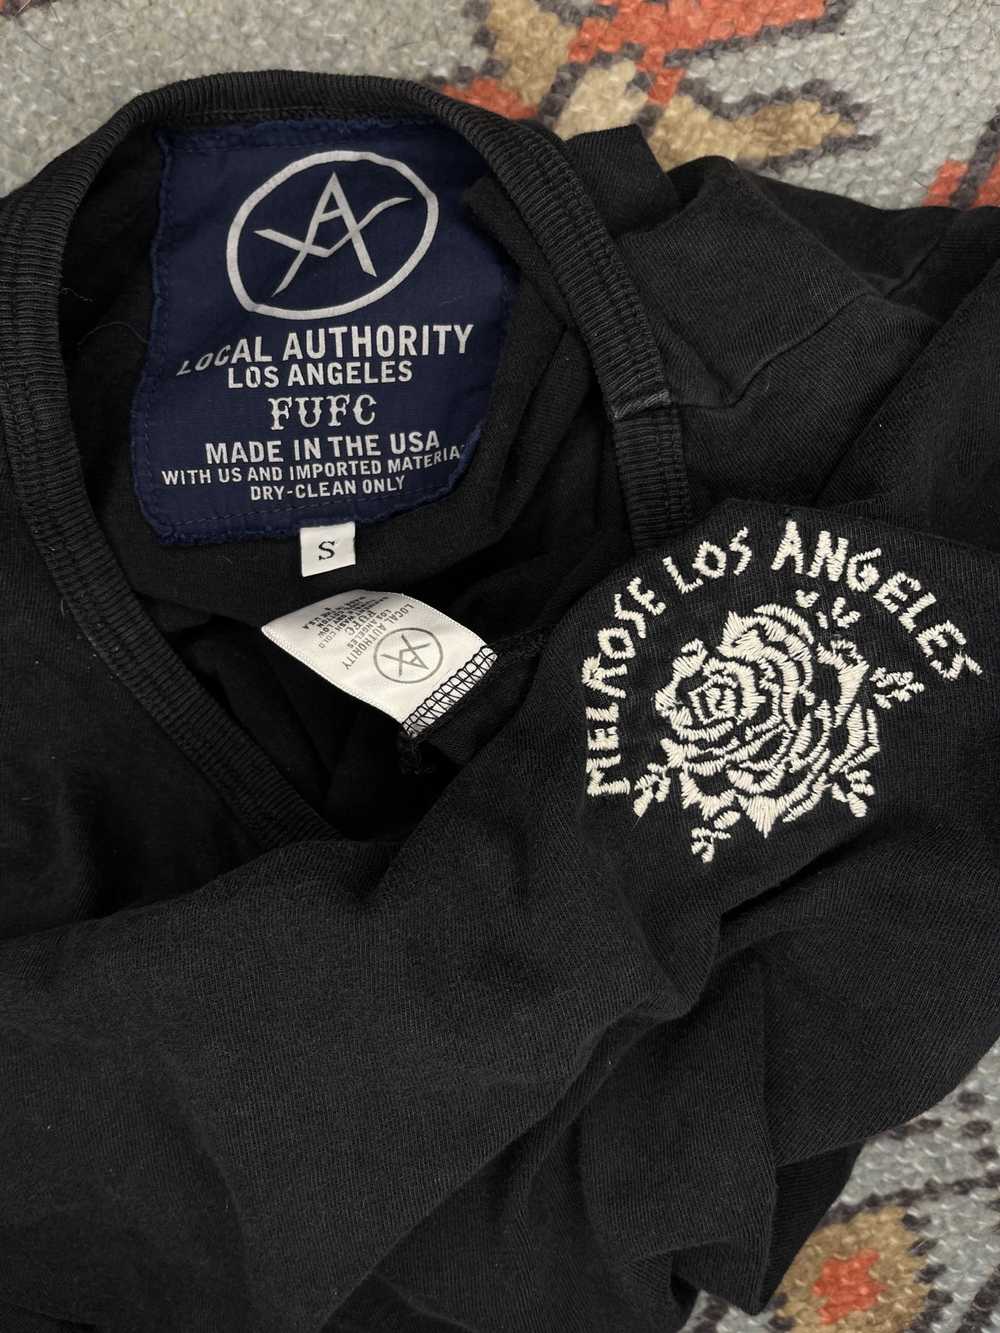 Local Authority Embroidered Melrose Tee - image 3